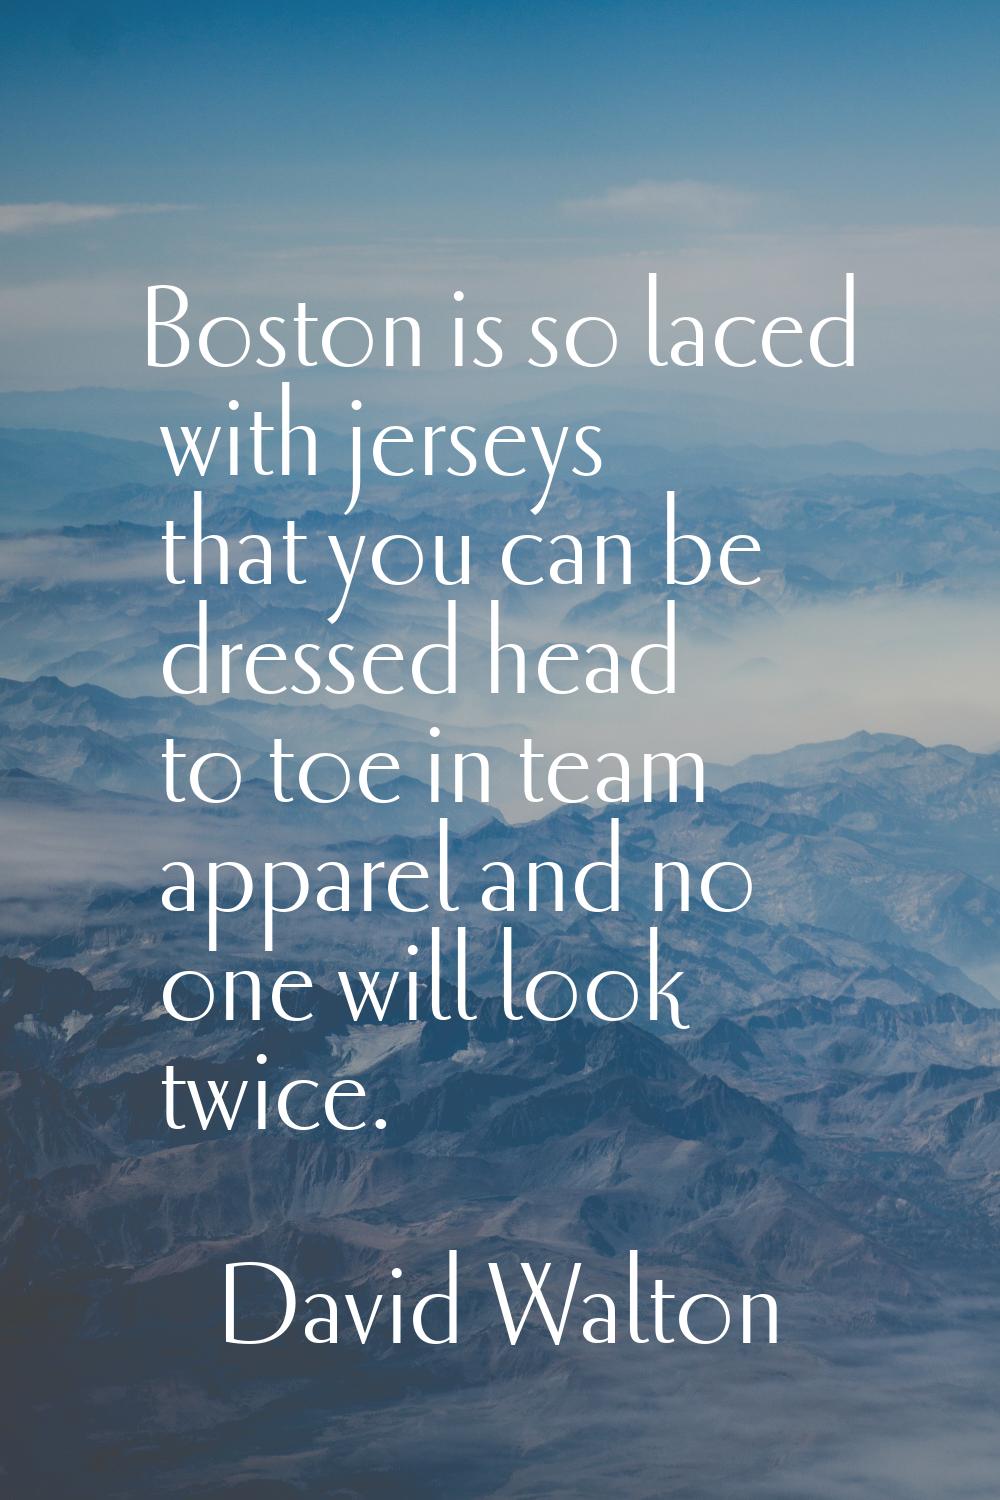 Boston is so laced with jerseys that you can be dressed head to toe in team apparel and no one will